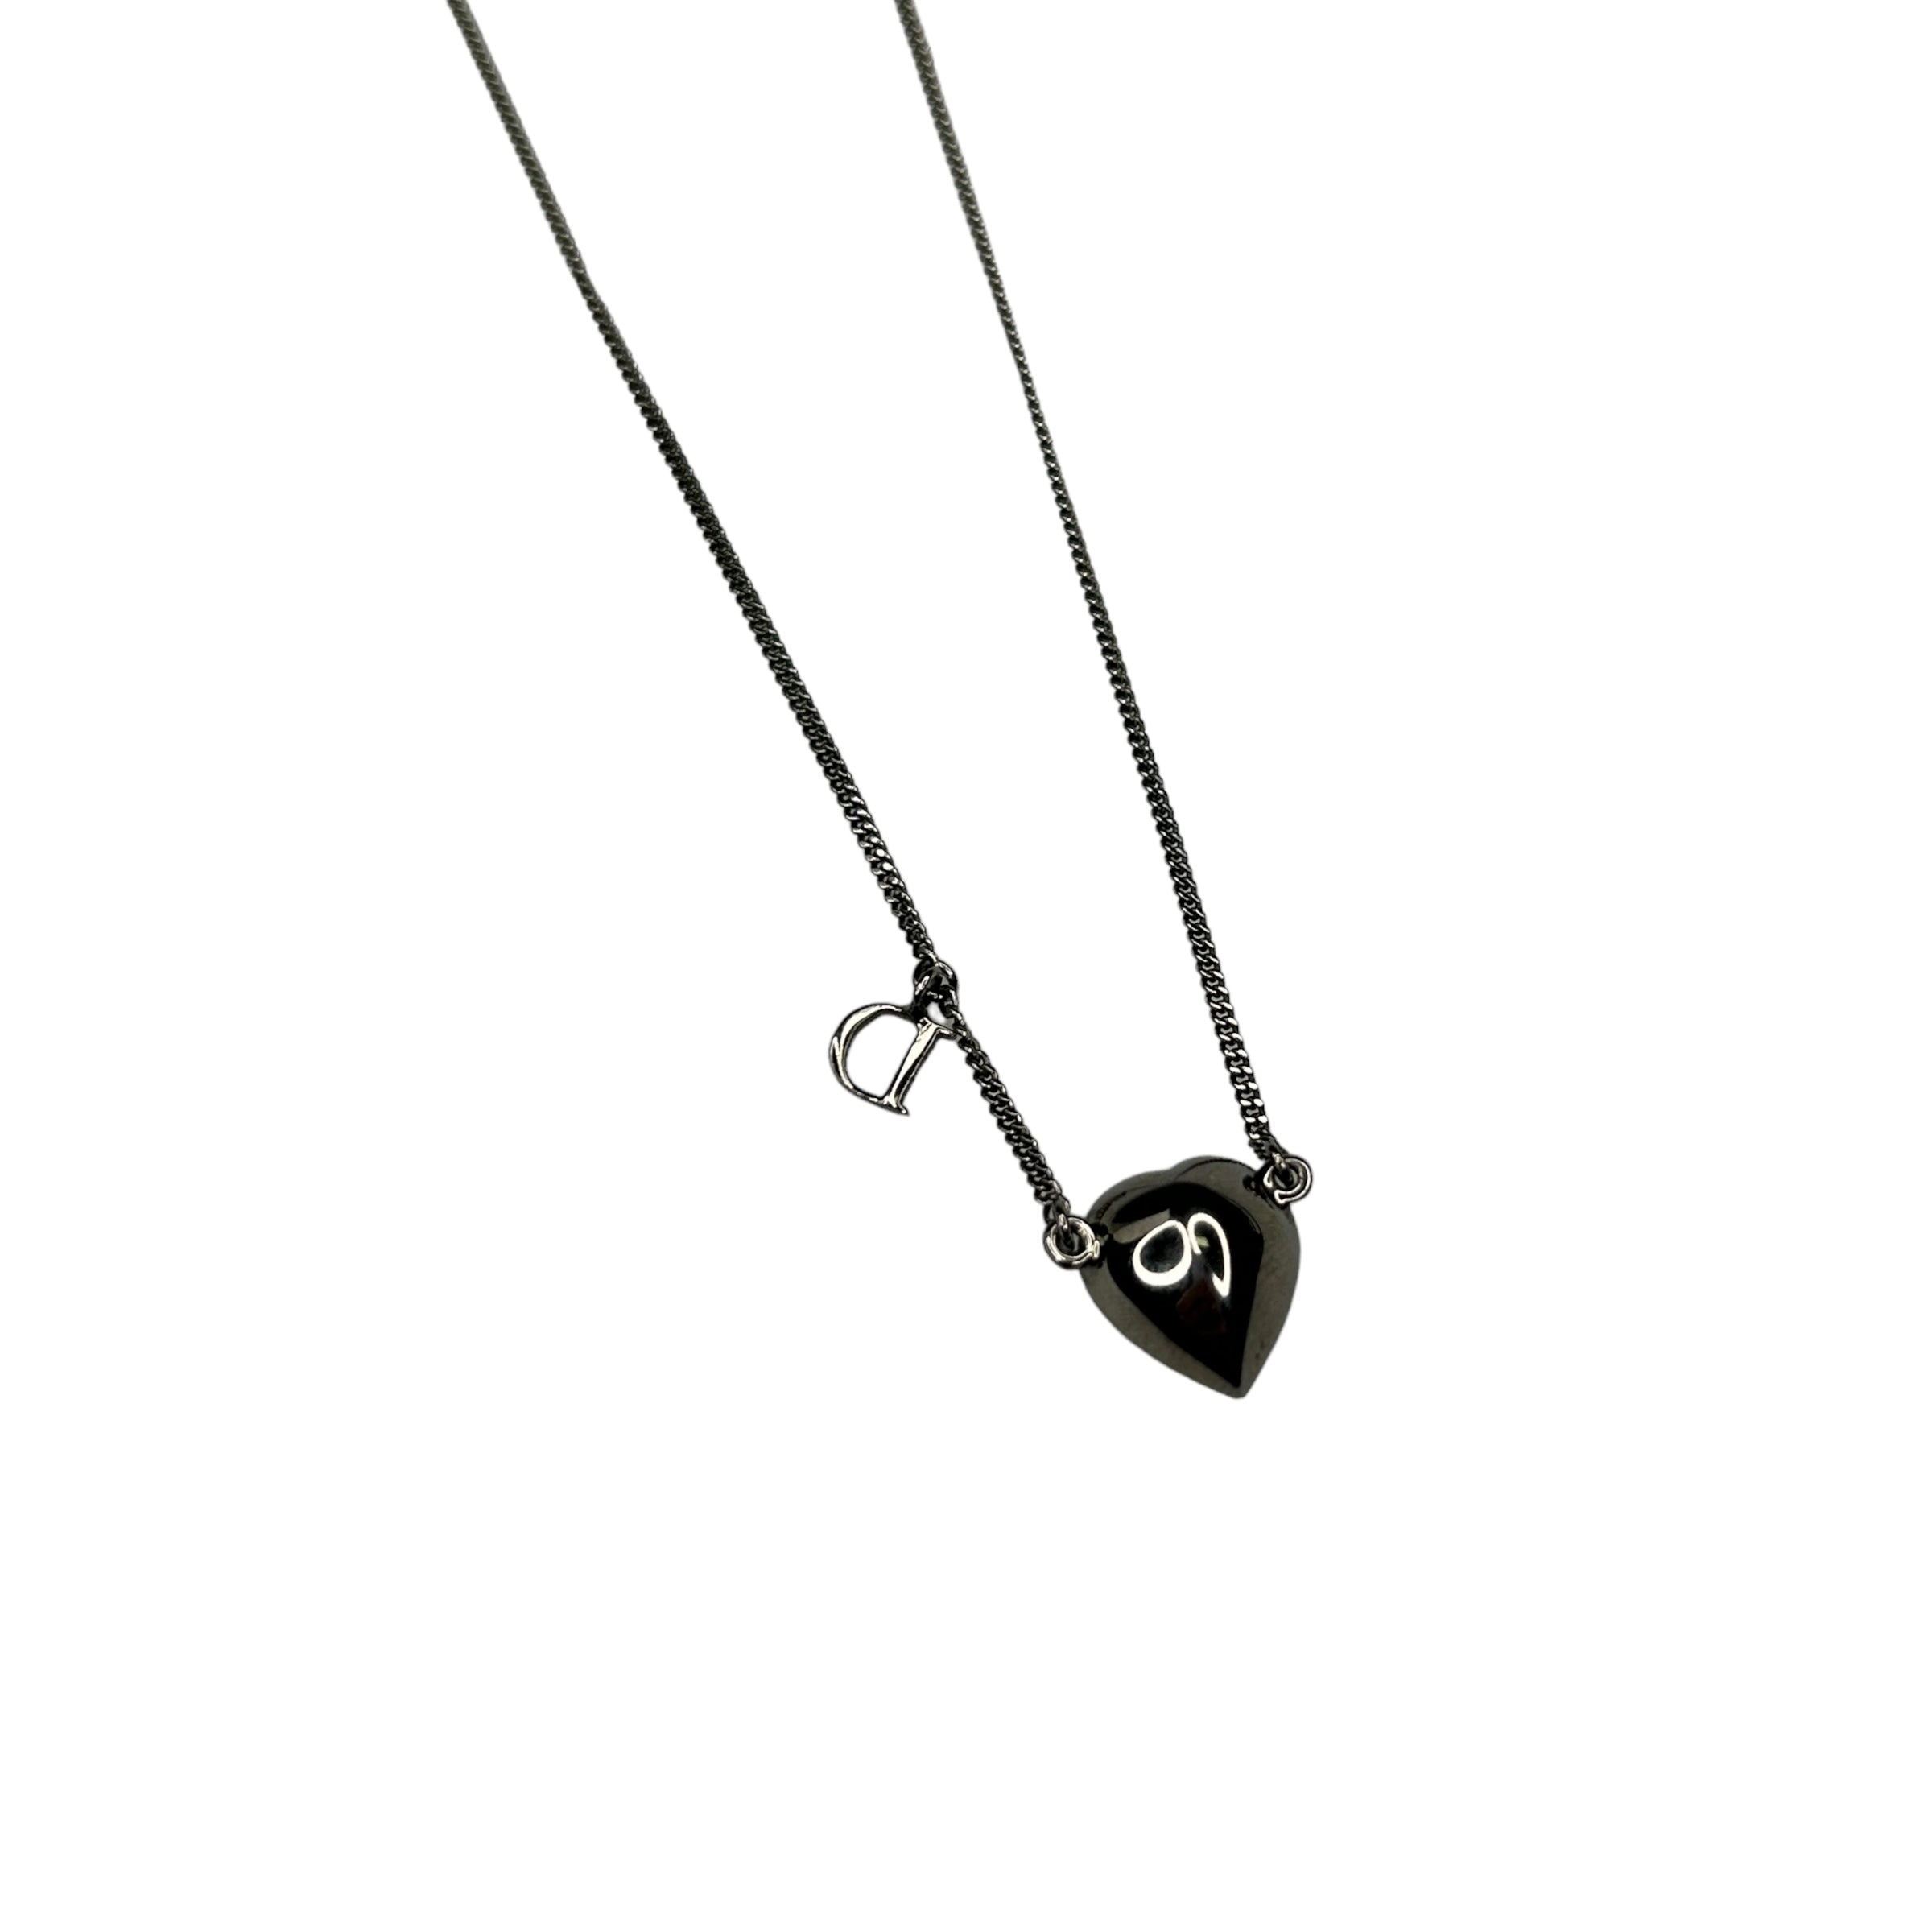 DIOR BLACK SILVER HEART STONE NECKLACE - SILVER PLATED HF4